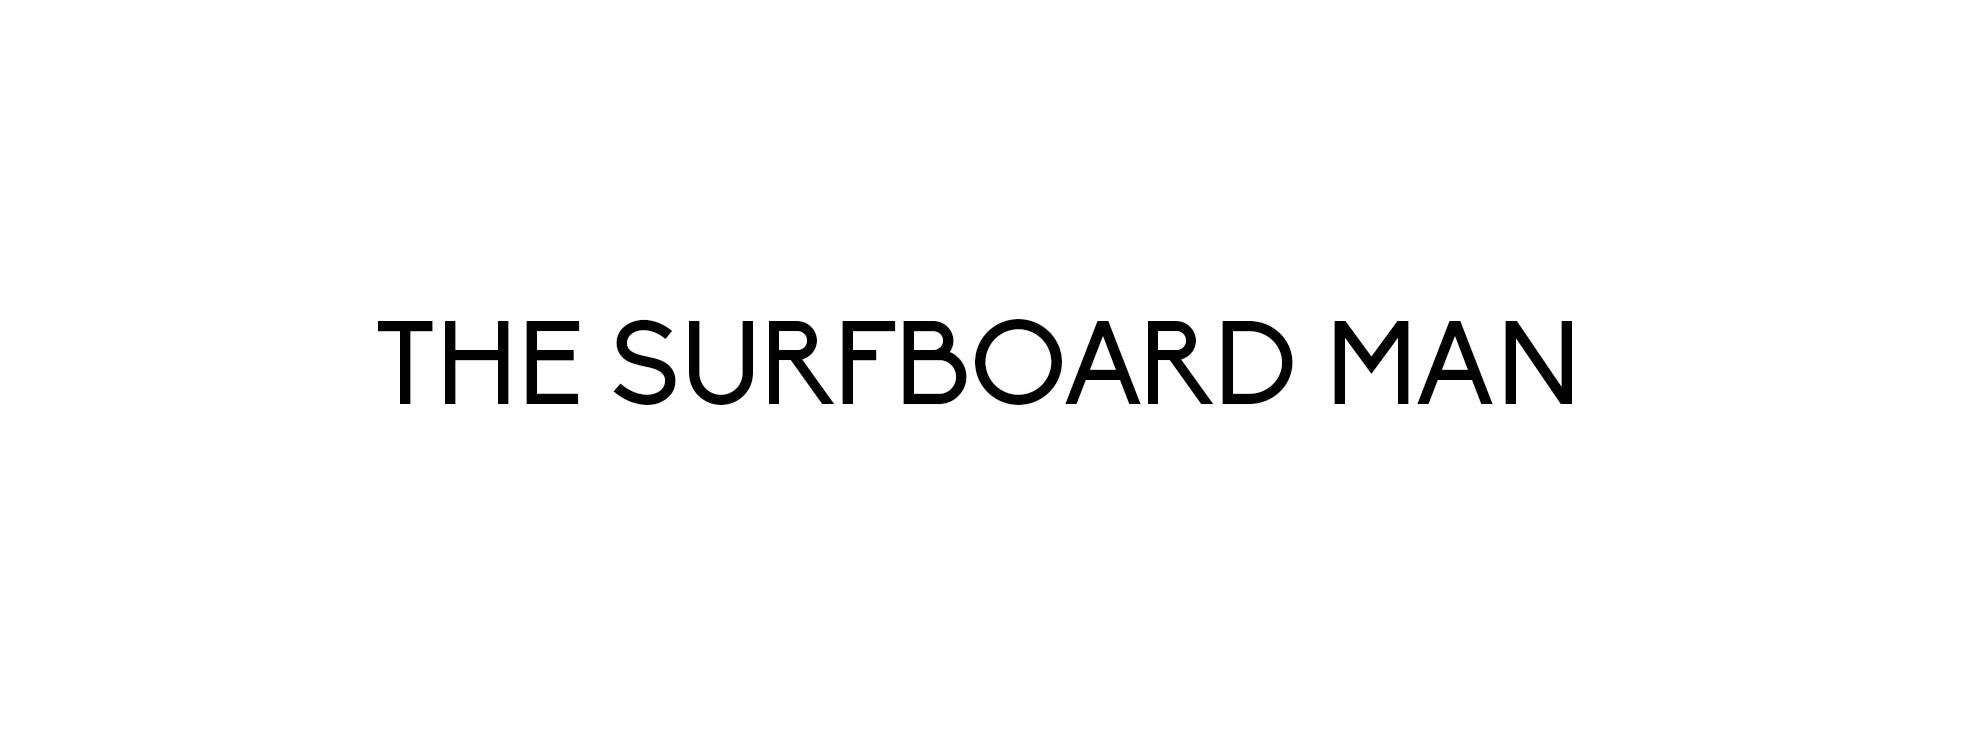 The Surfboard Man Exclusive Interview with Slyde Handboards Steve Watts